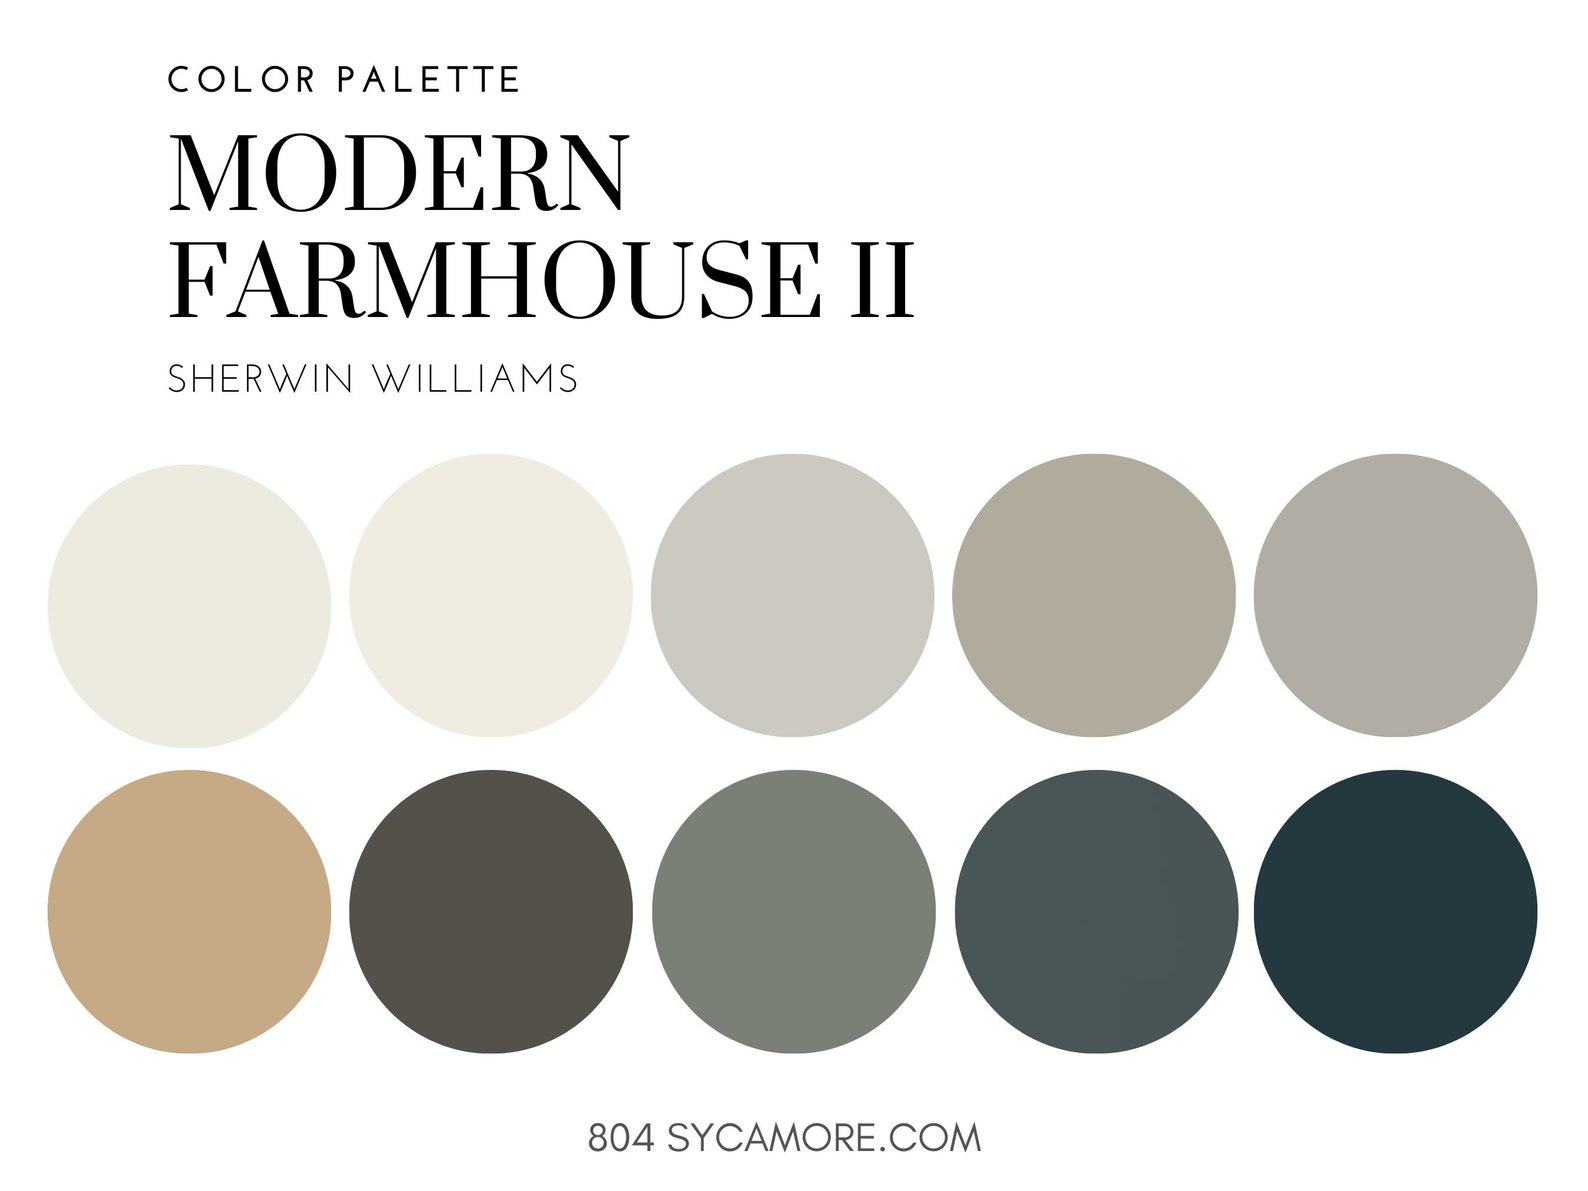 Modern Farmhouse II Home Color Palette Sherwin Williams - Etsy